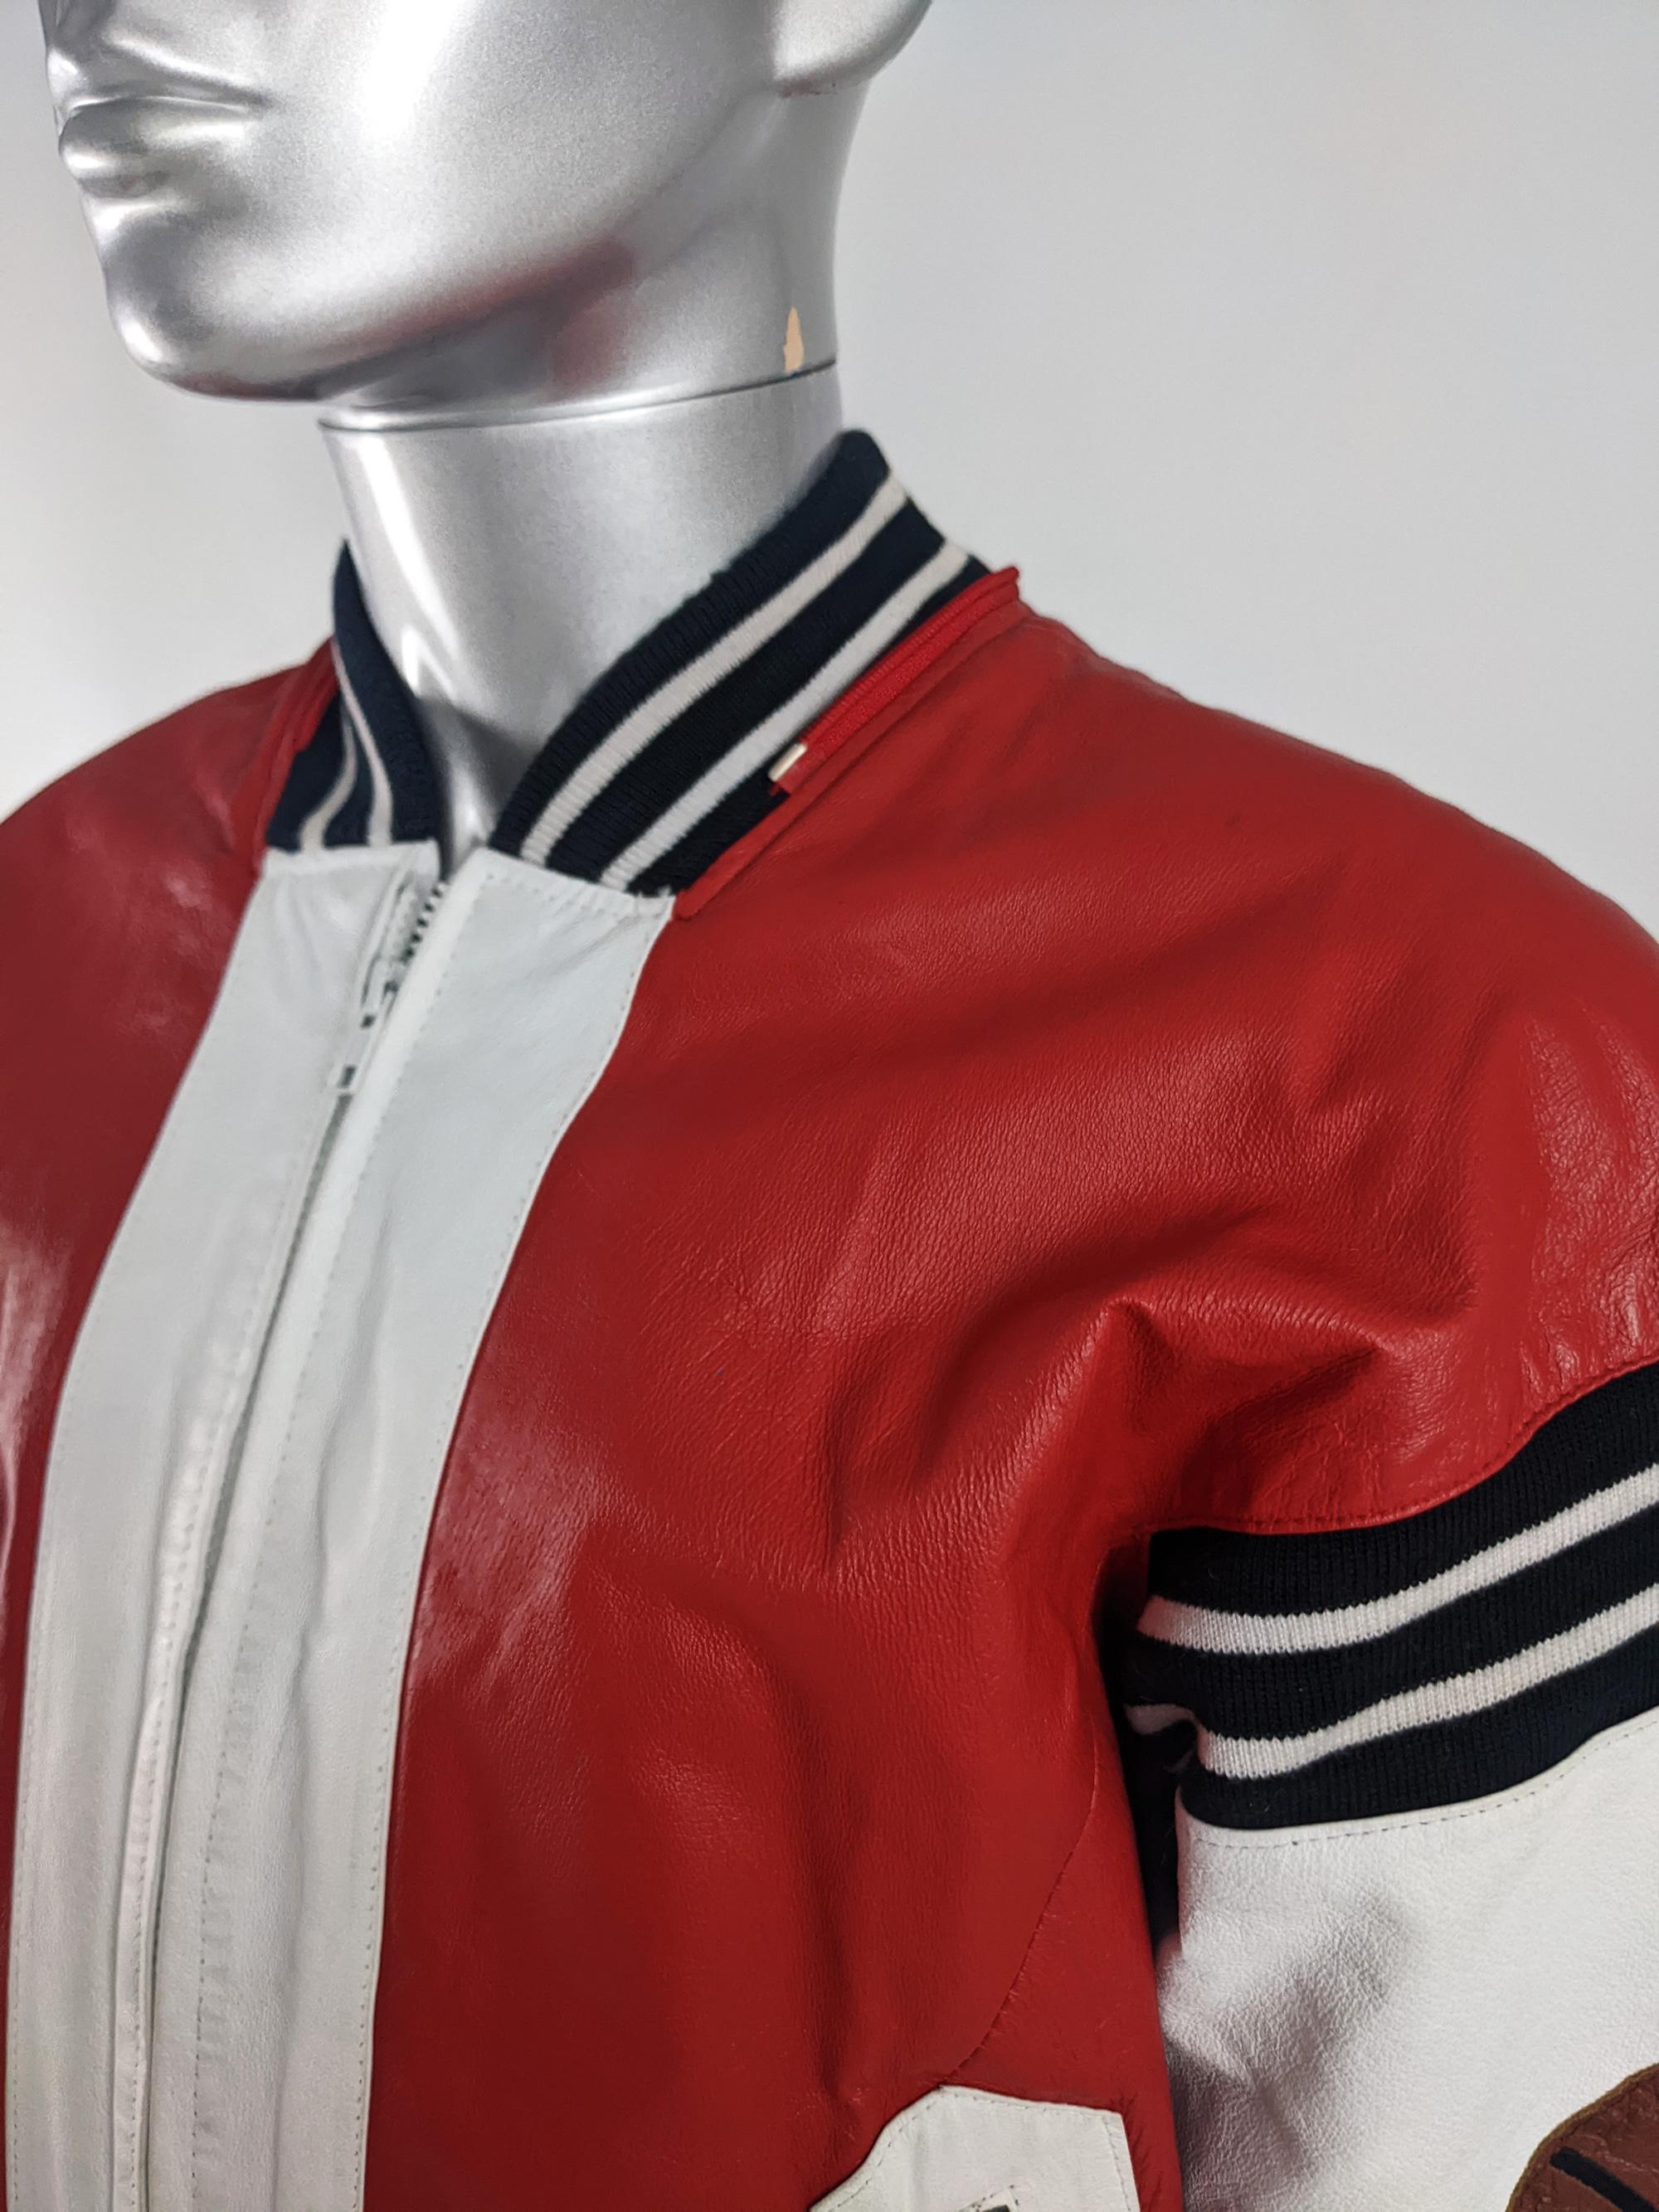 80s leather jacket outfit men's